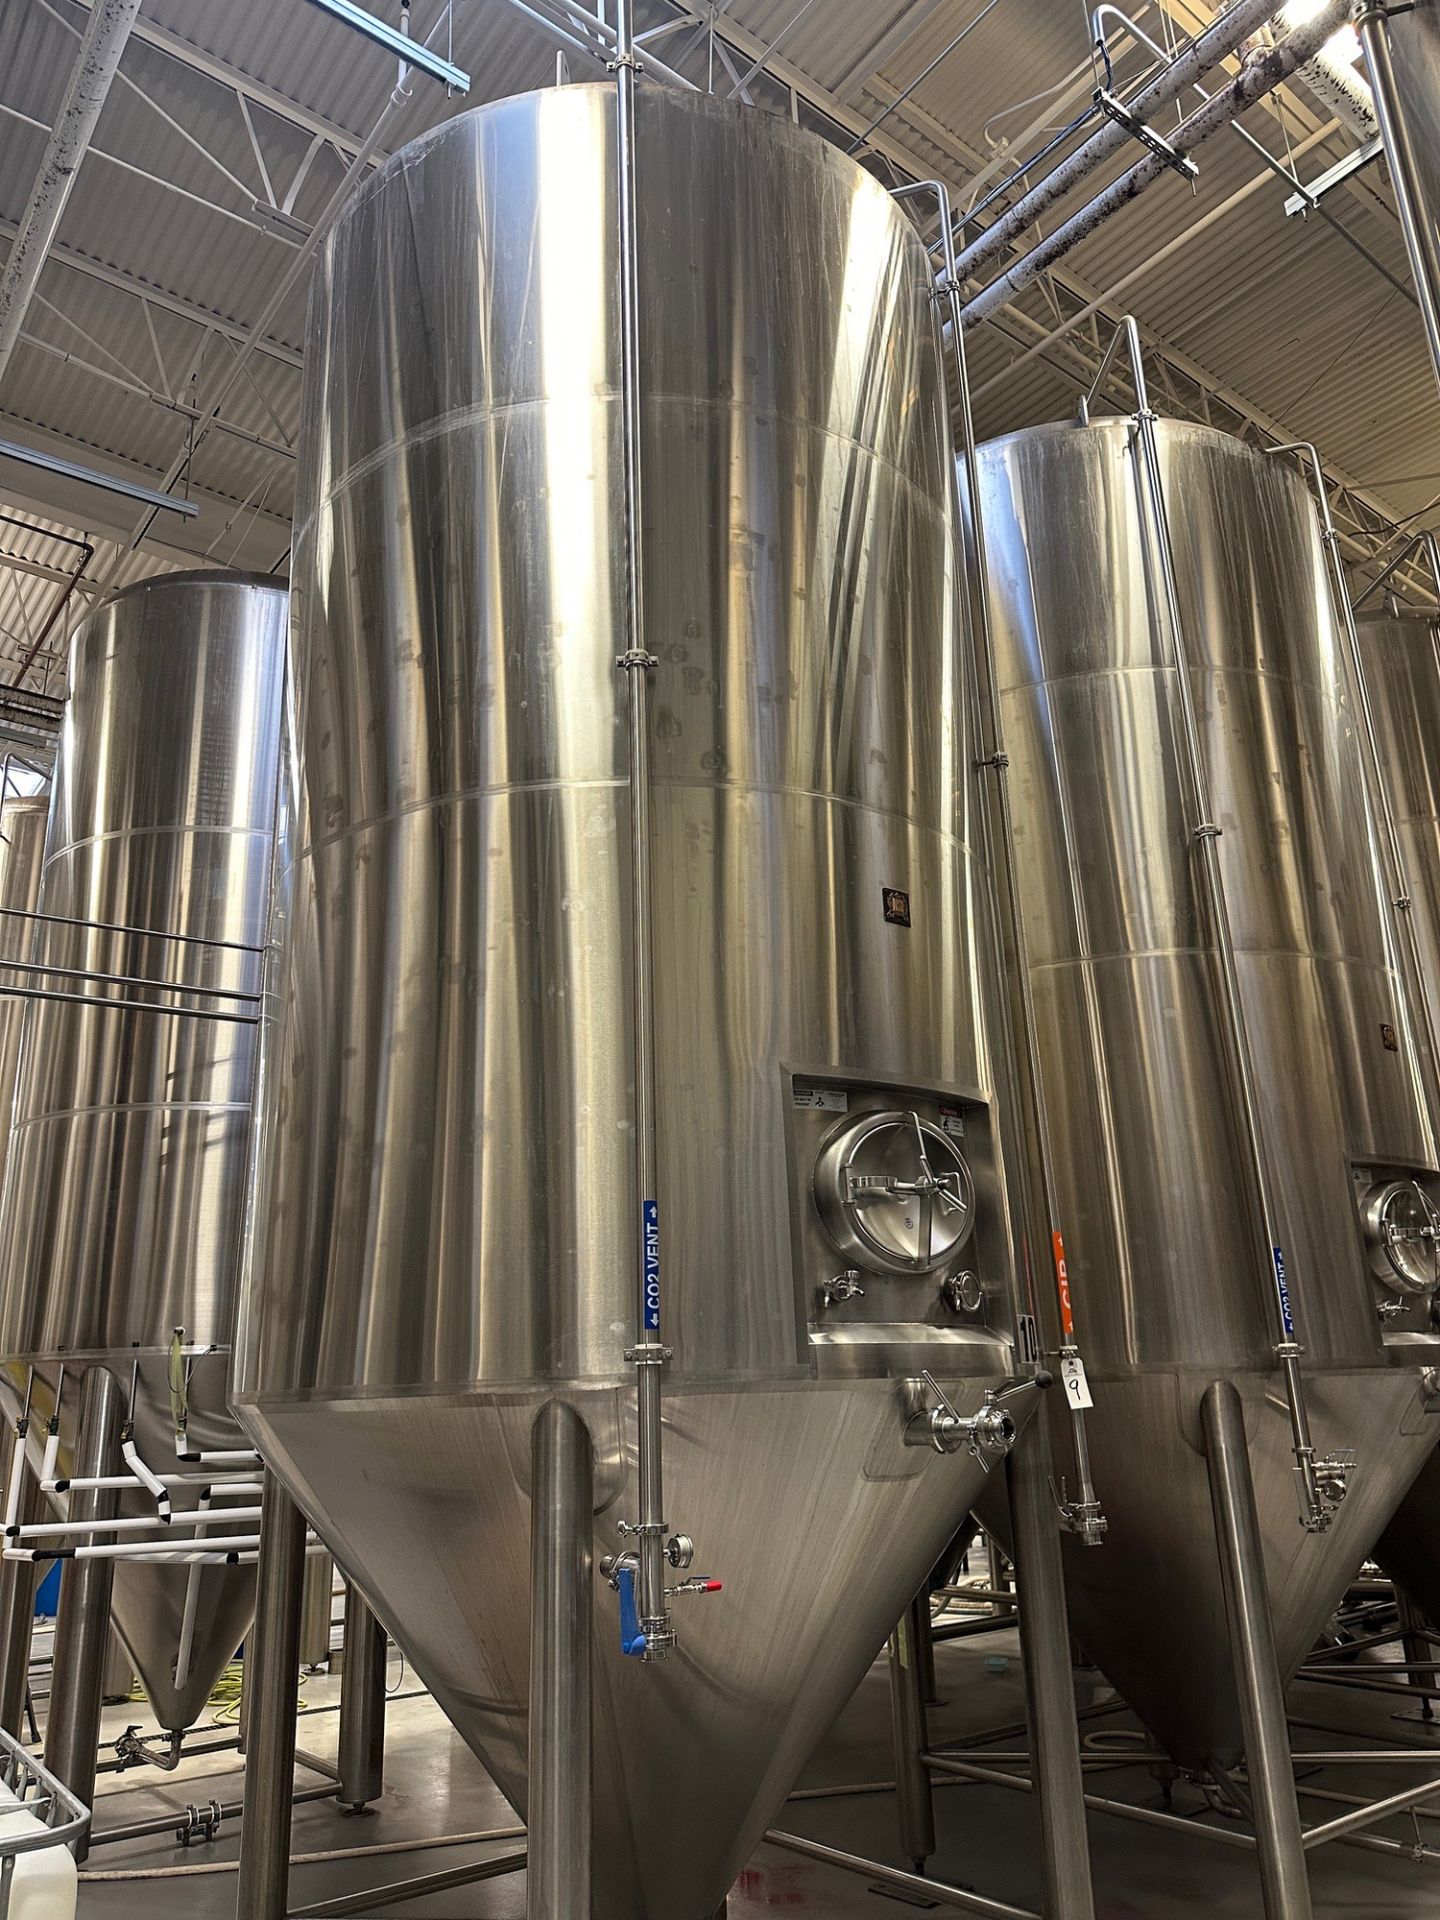 (1 of 6) 2016 NSI 132 BBL FV / 175 BBL or 5,400 Gal Max Capacity Stainless Steel Uni-Tank (10), Cone